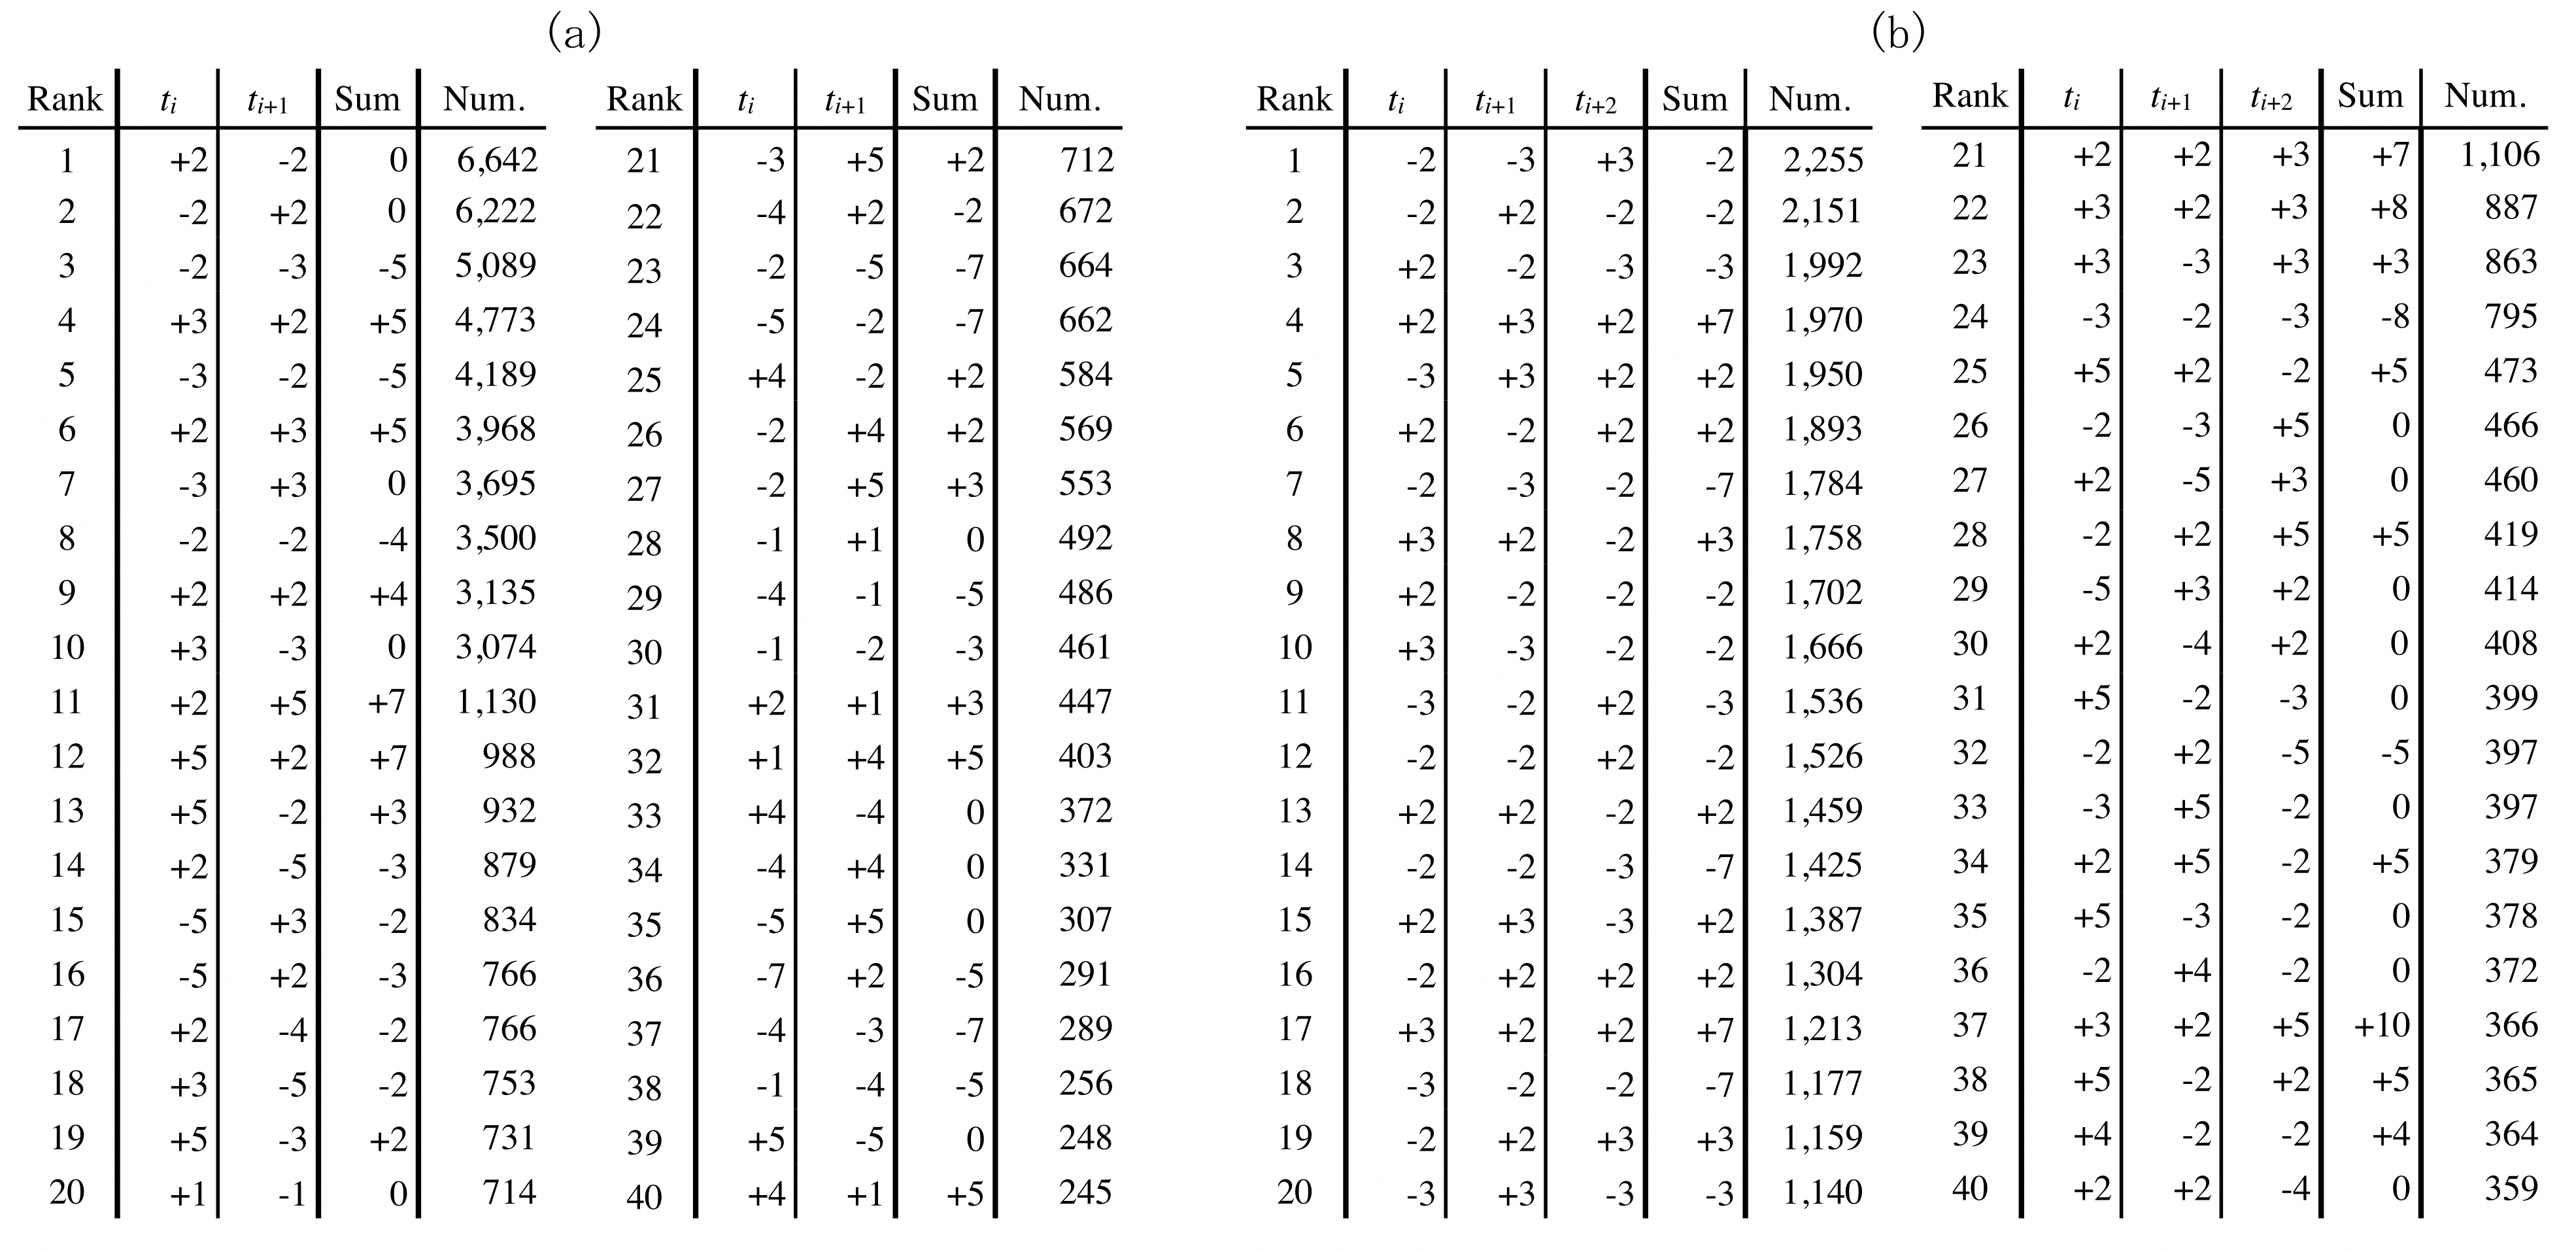 Table 3: Frequency of Occurrence of (a) Bigrams and (b) Trigram (Top 40 Patterns)